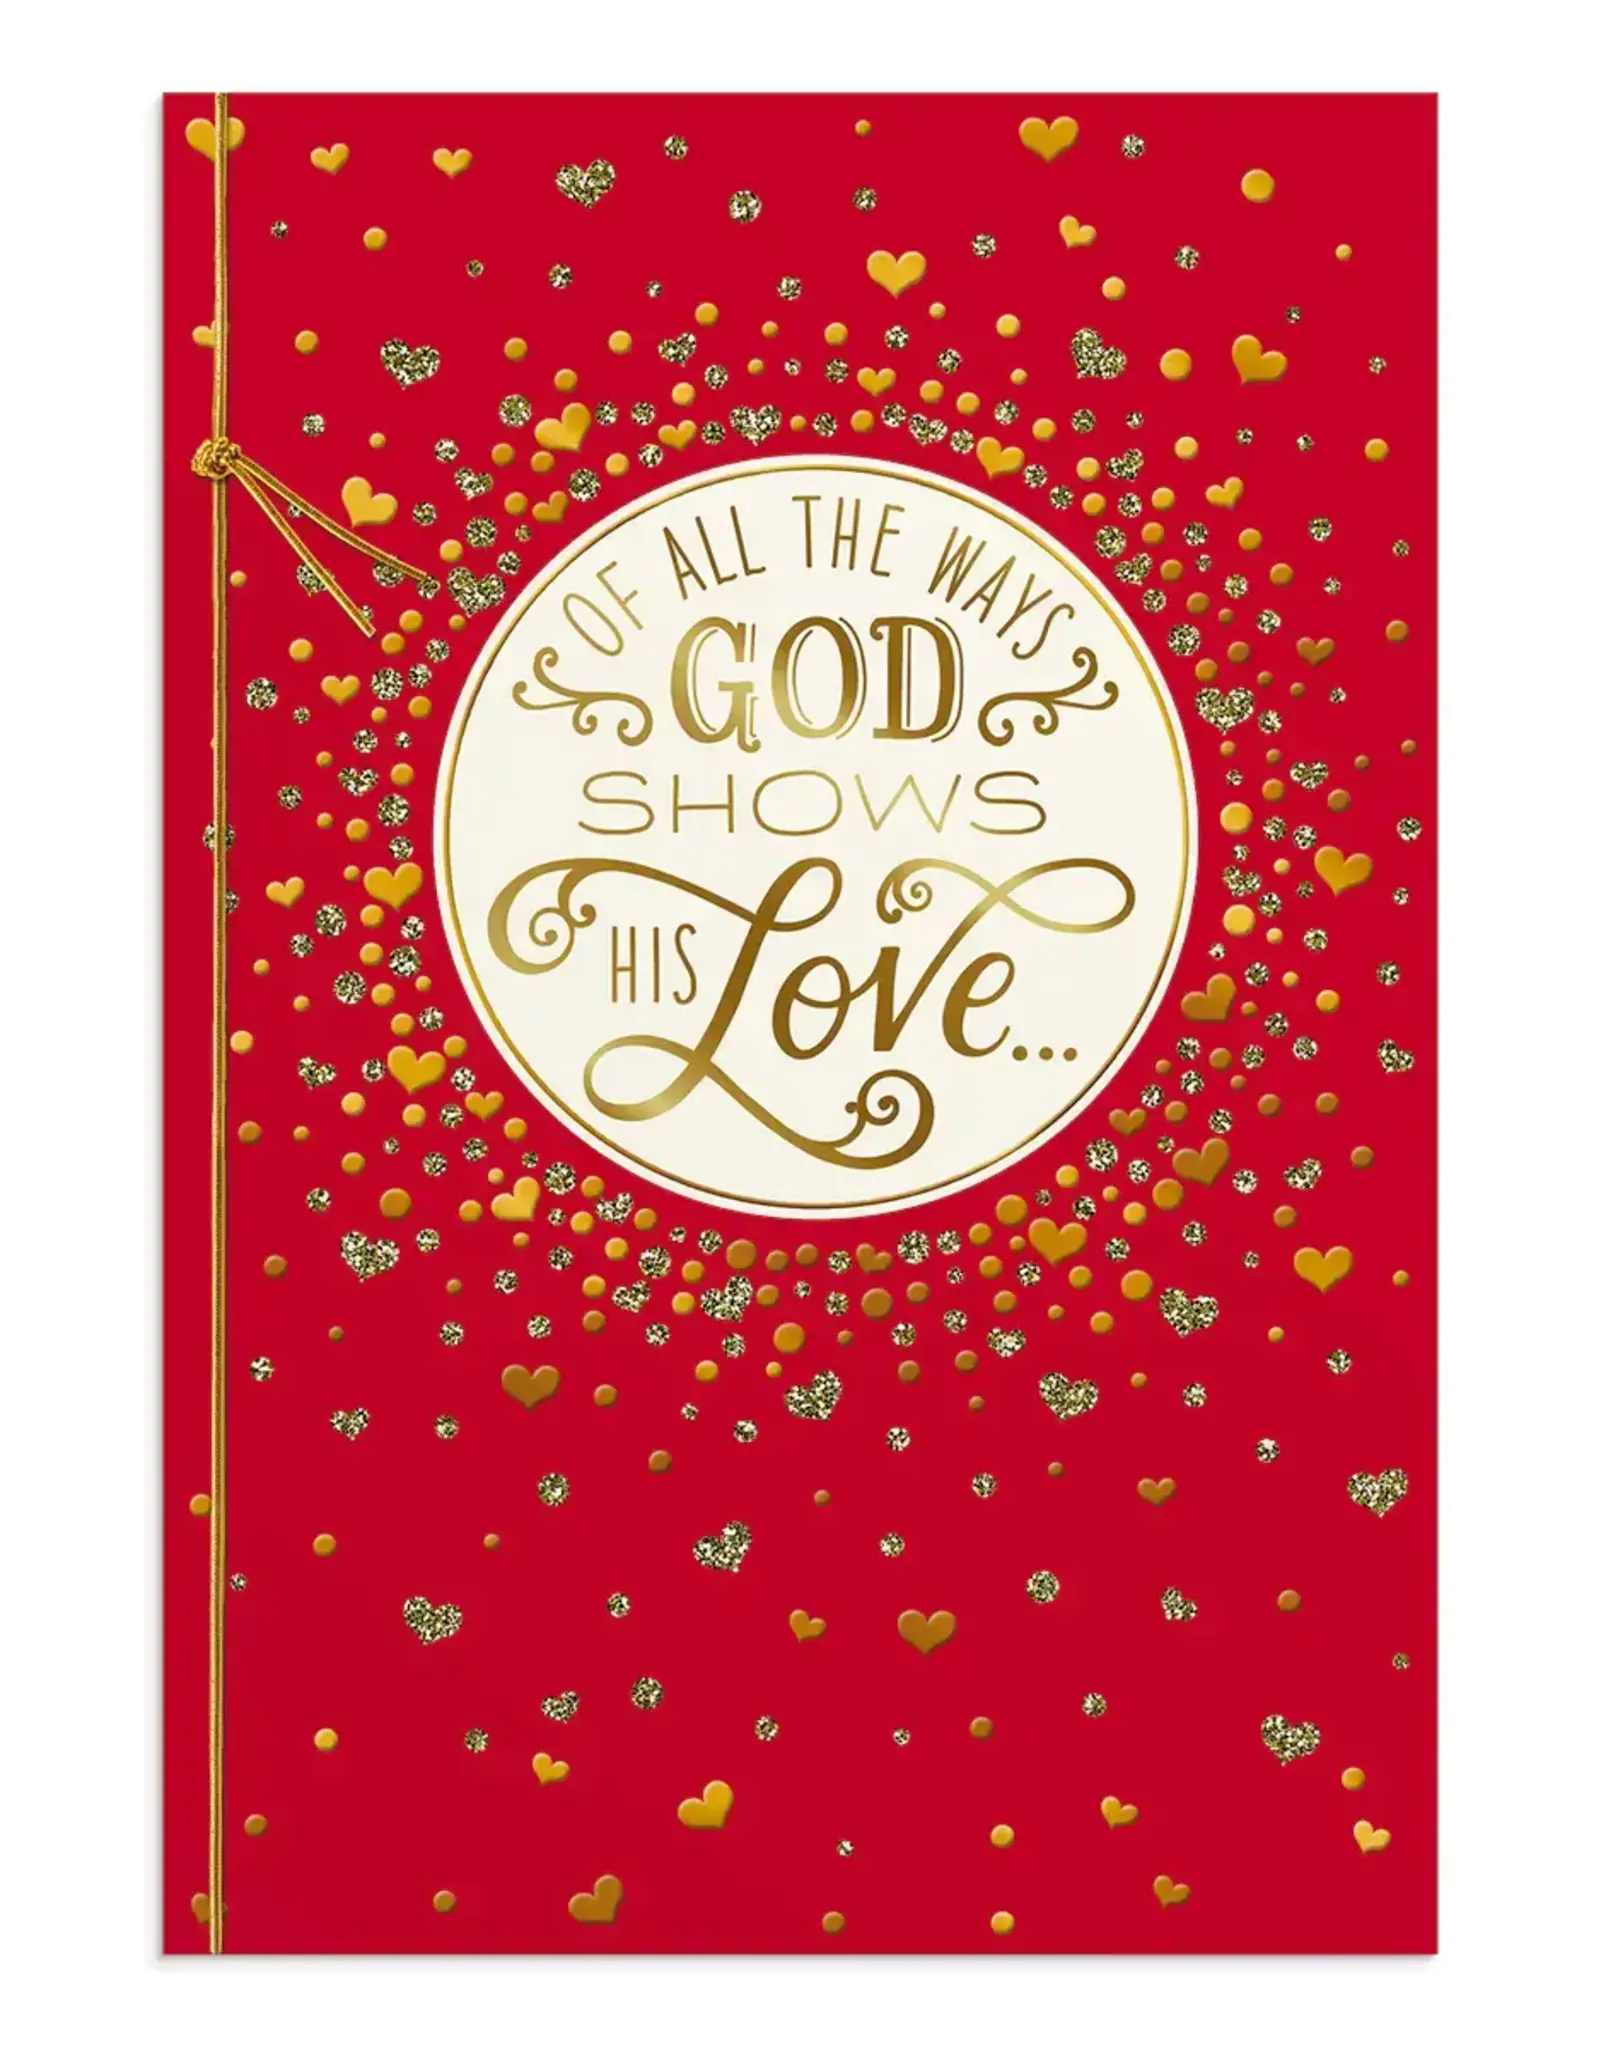 Dayspring Valentine's Day Card (Anyone) - The Ways God Shows his Love